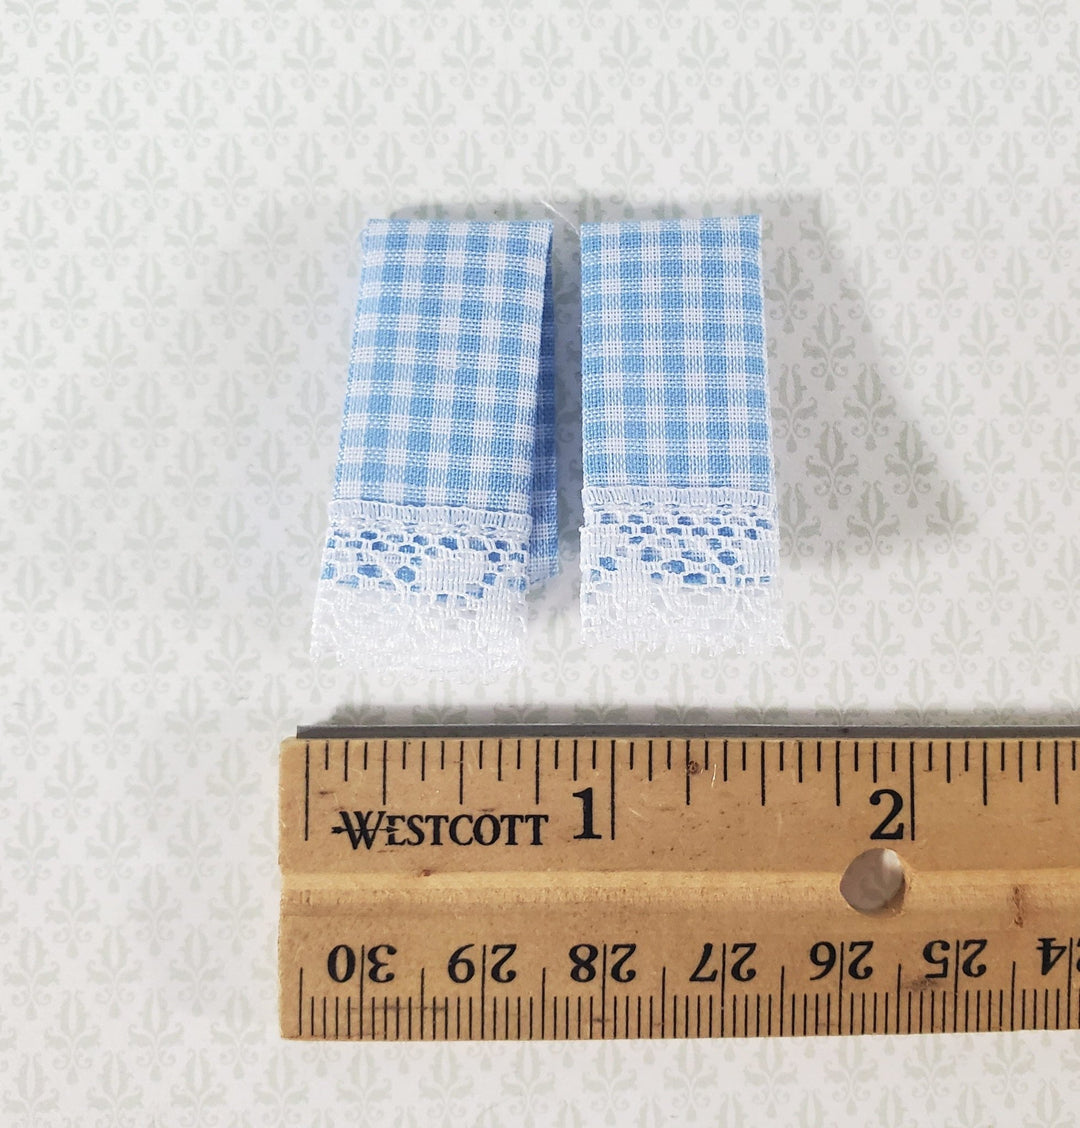 Dollhouse Towels with Lace Blue White Gingham Handmade 1:12 Scale Miniature for Kitchen - Miniature Crush